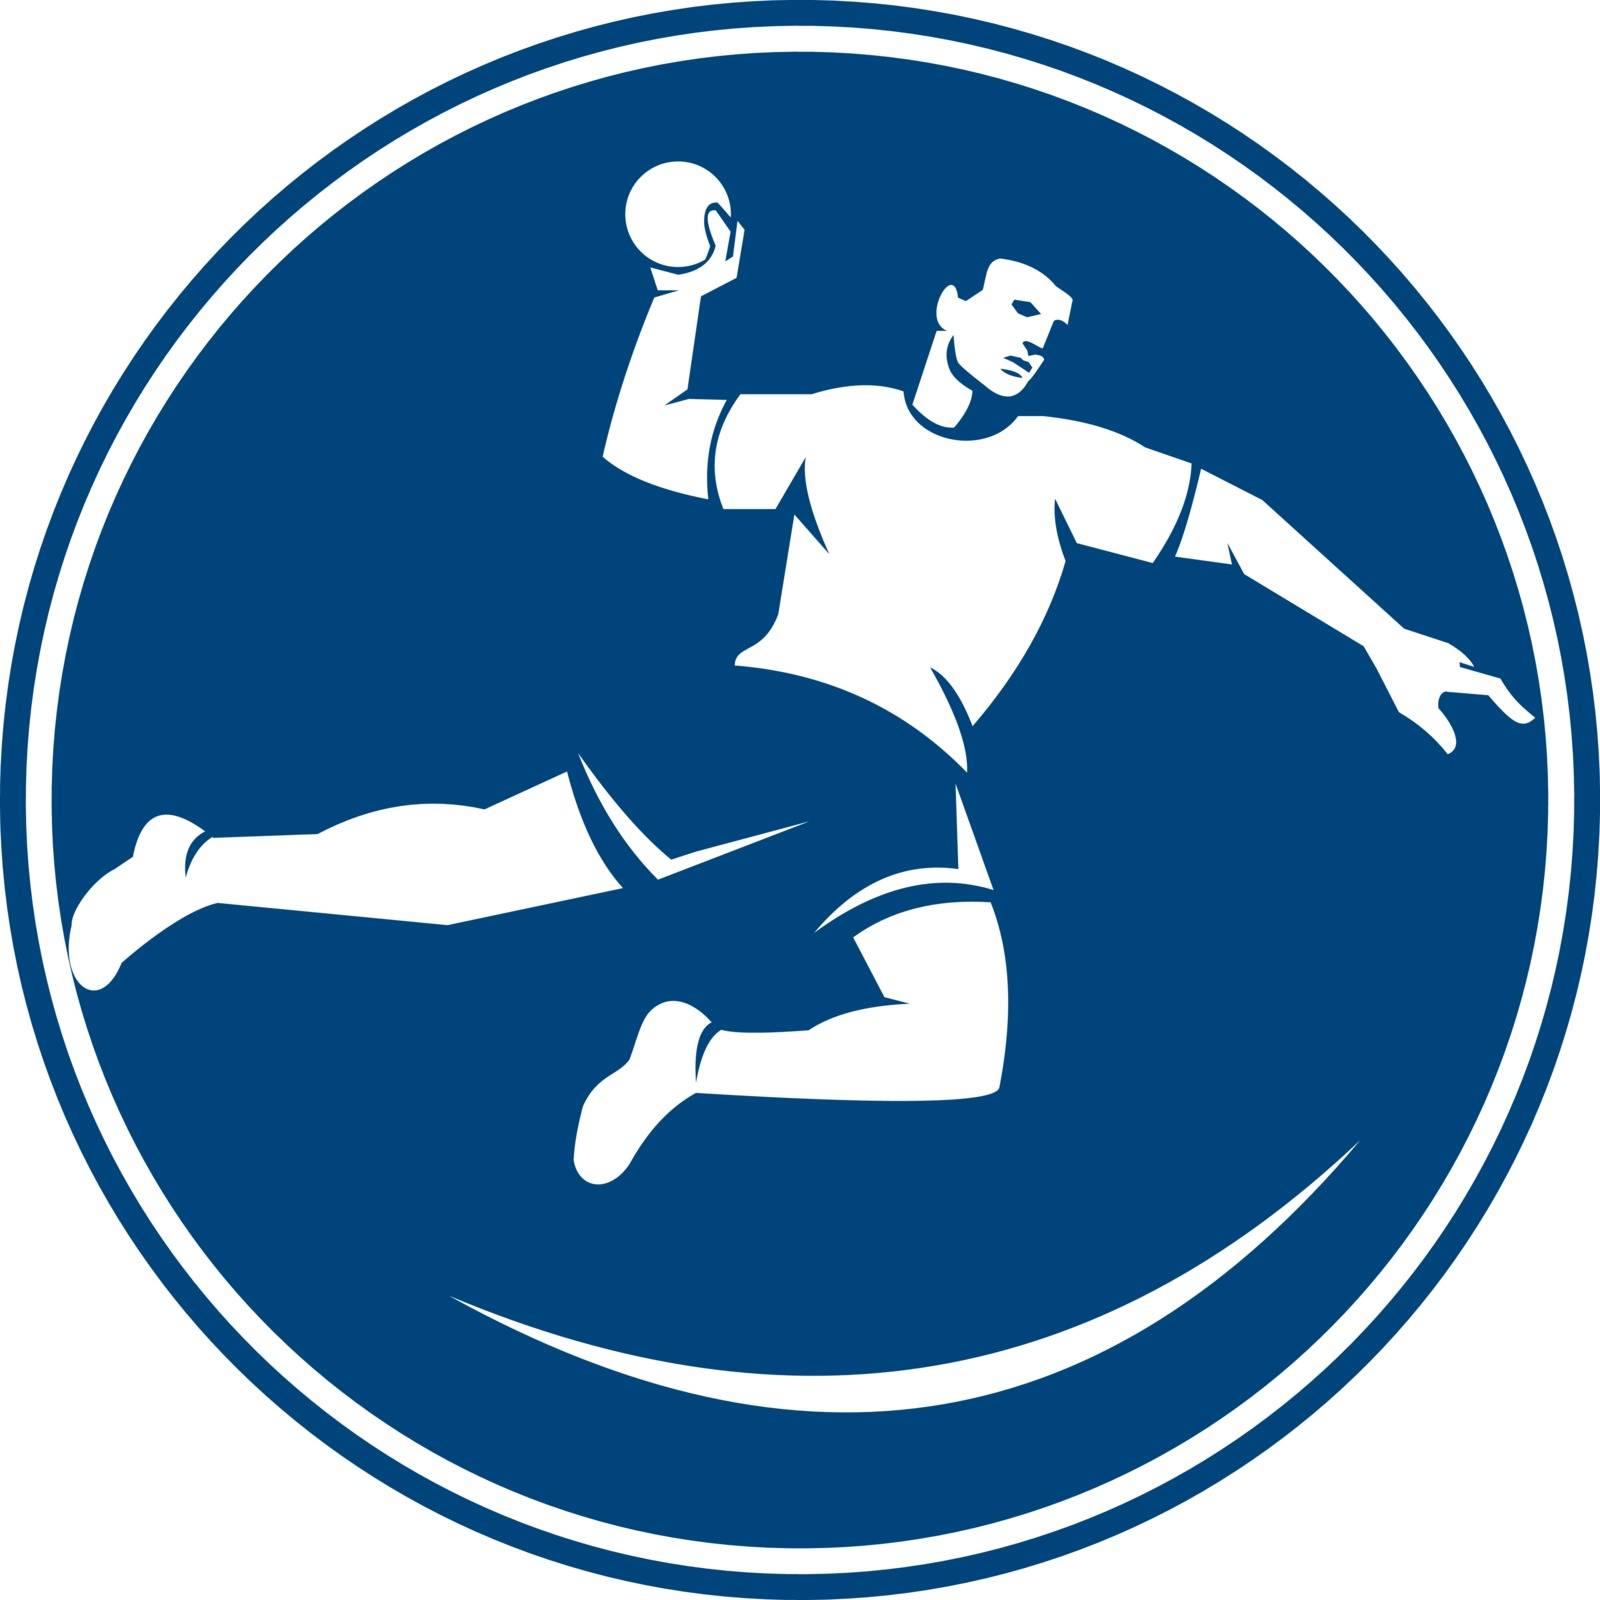 Icon illustration of a handball player jumping throwing ball scoring set inside circle on isolated background done in retro style.